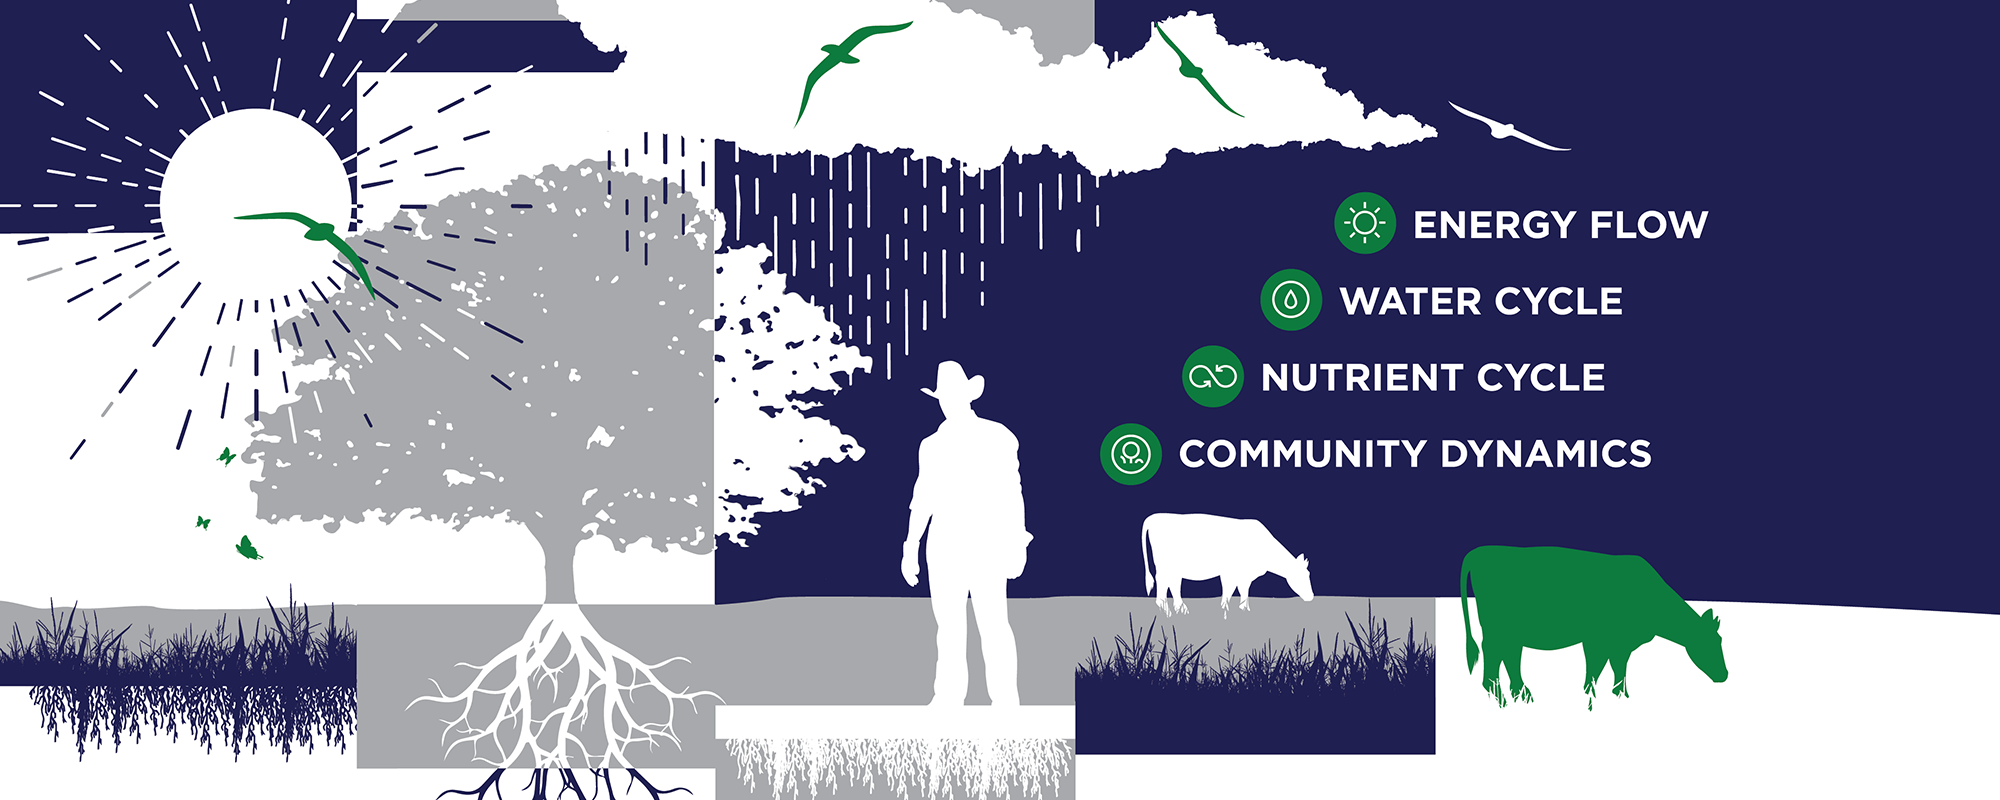 Graphic Illustrating the four ecosystem processes: Energy Flow, Water Cycle, Nutrient Cycle, Community Dynamics.